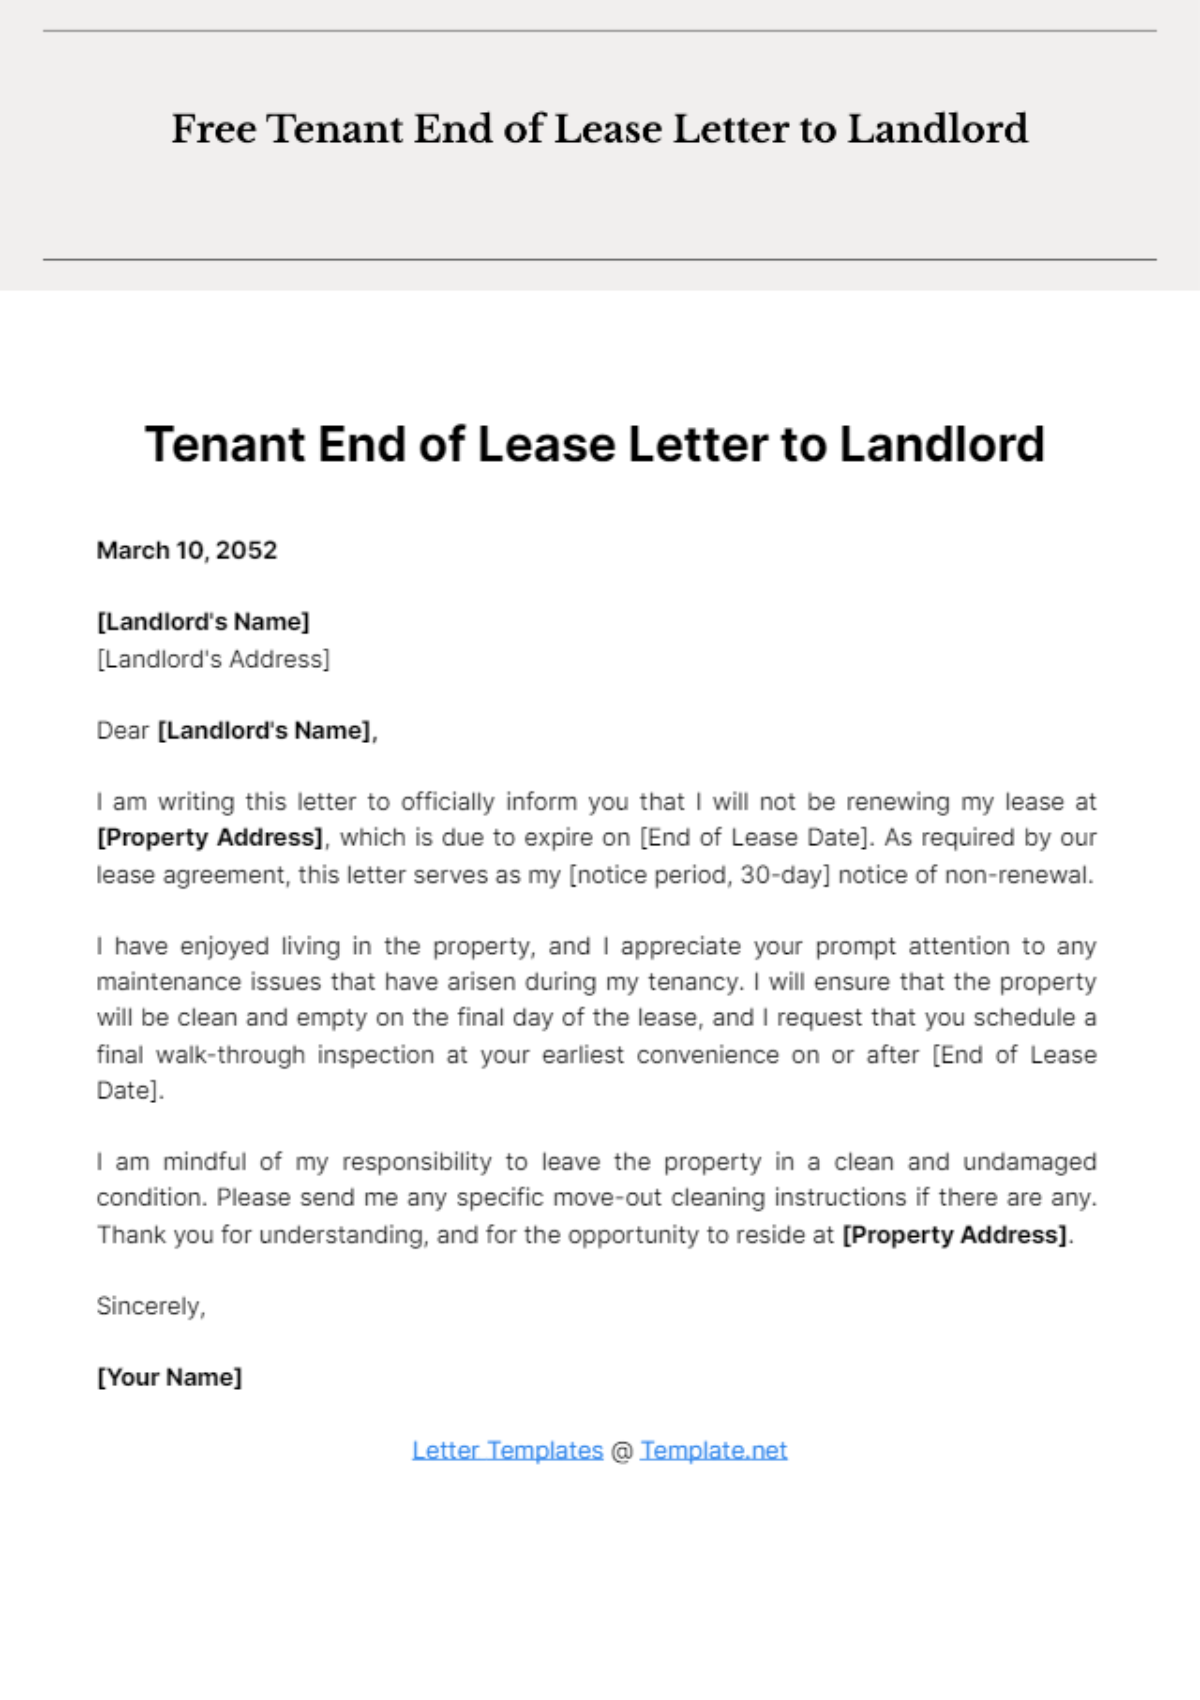 Free Tenant End of Lease Letter to Landlord Template